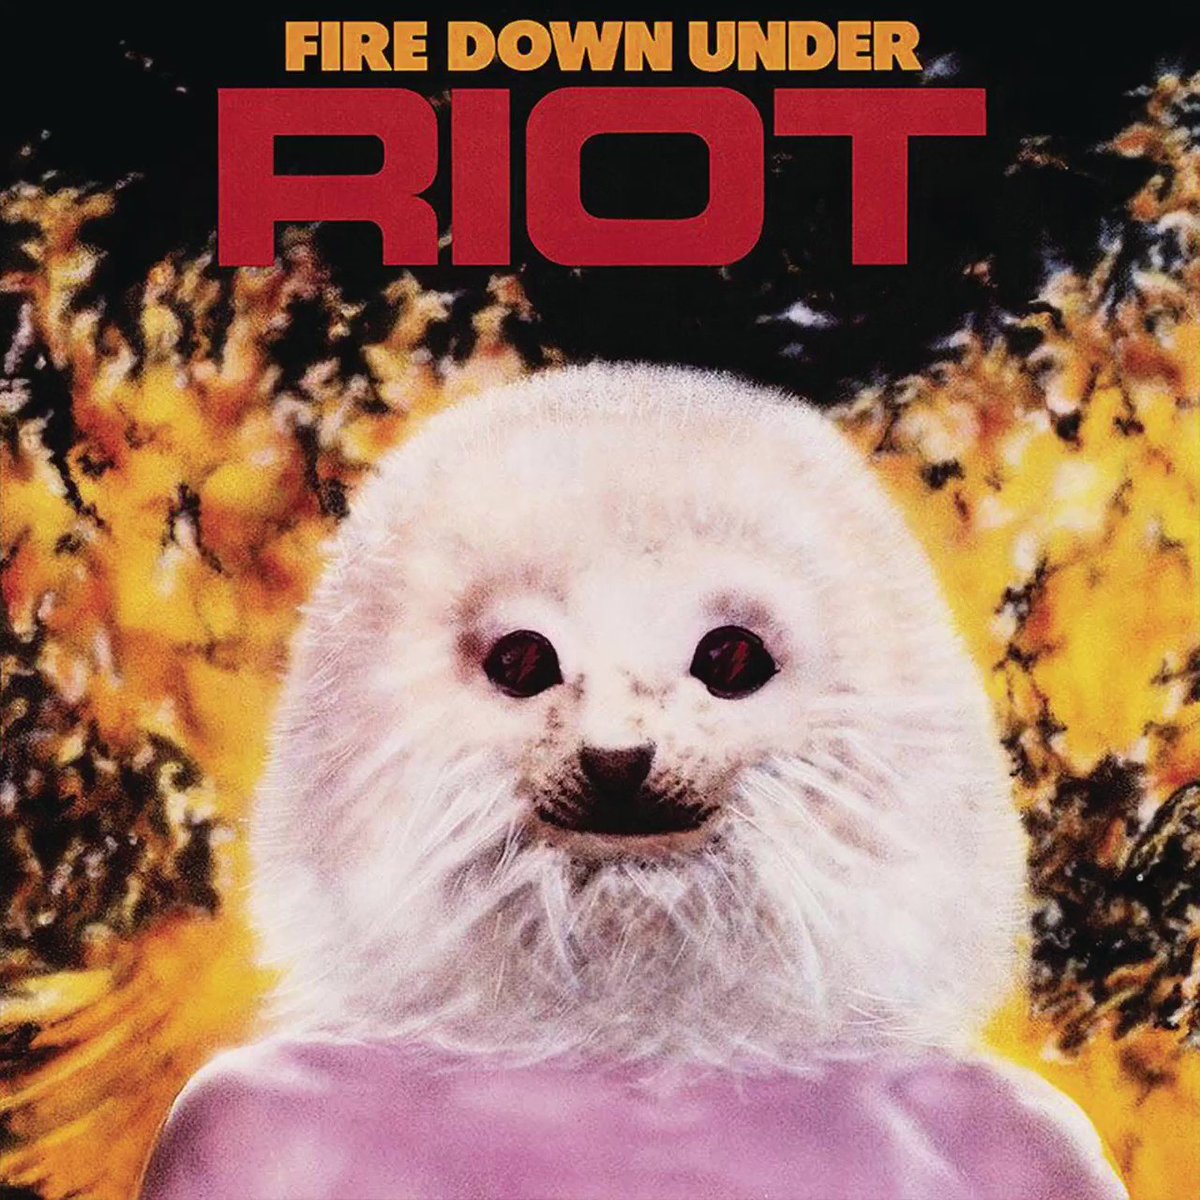 RT @MonstersOfRock: On this day in 1981, Riot release ‘Fire Down Under.’ https://t.co/i1m1hNTx6G